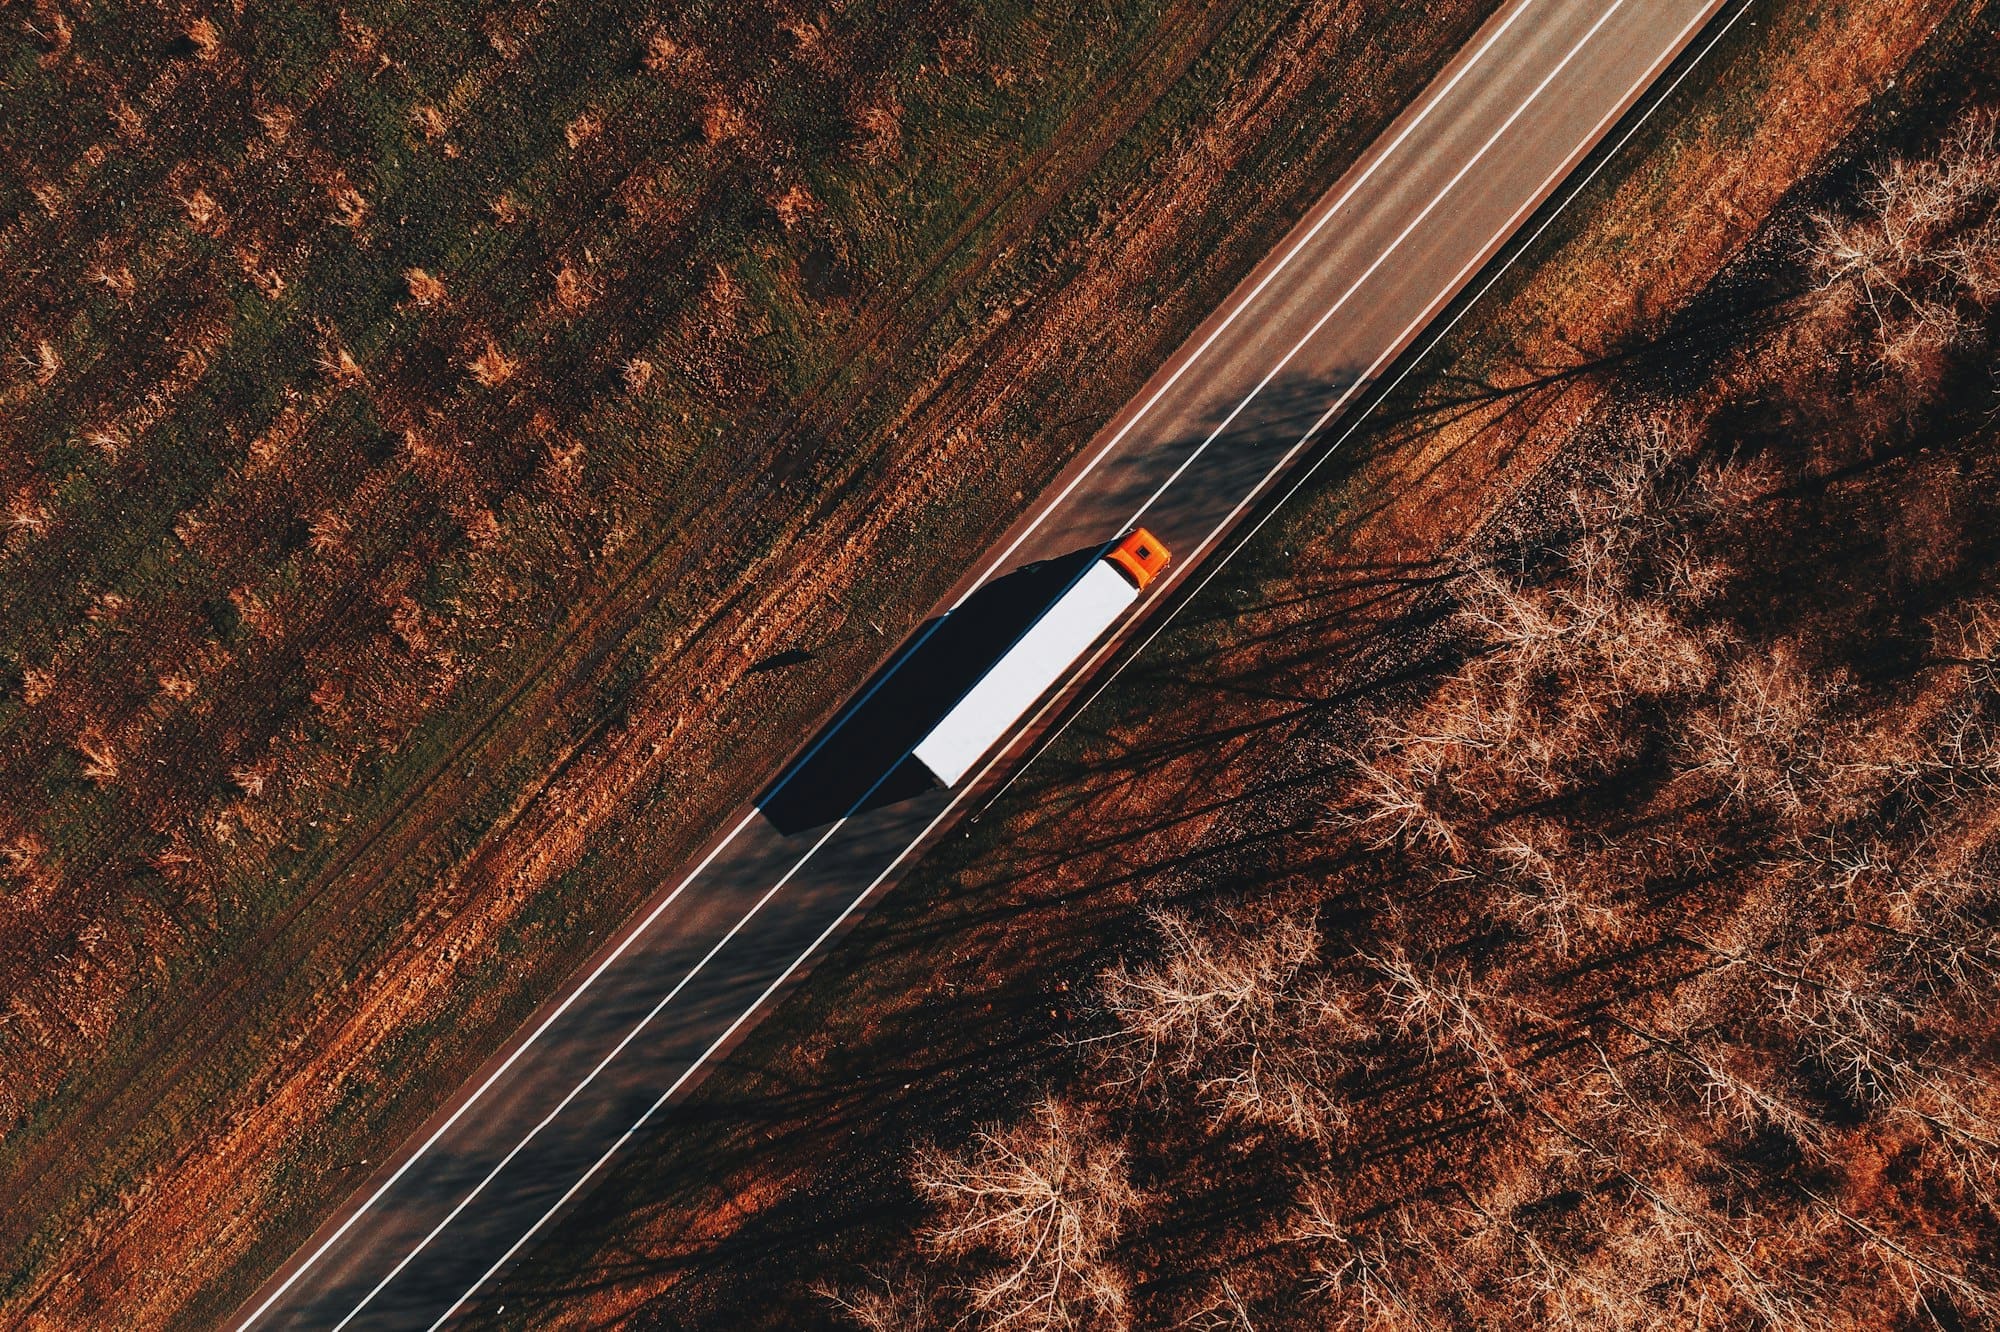 Semi-truck on the road from above